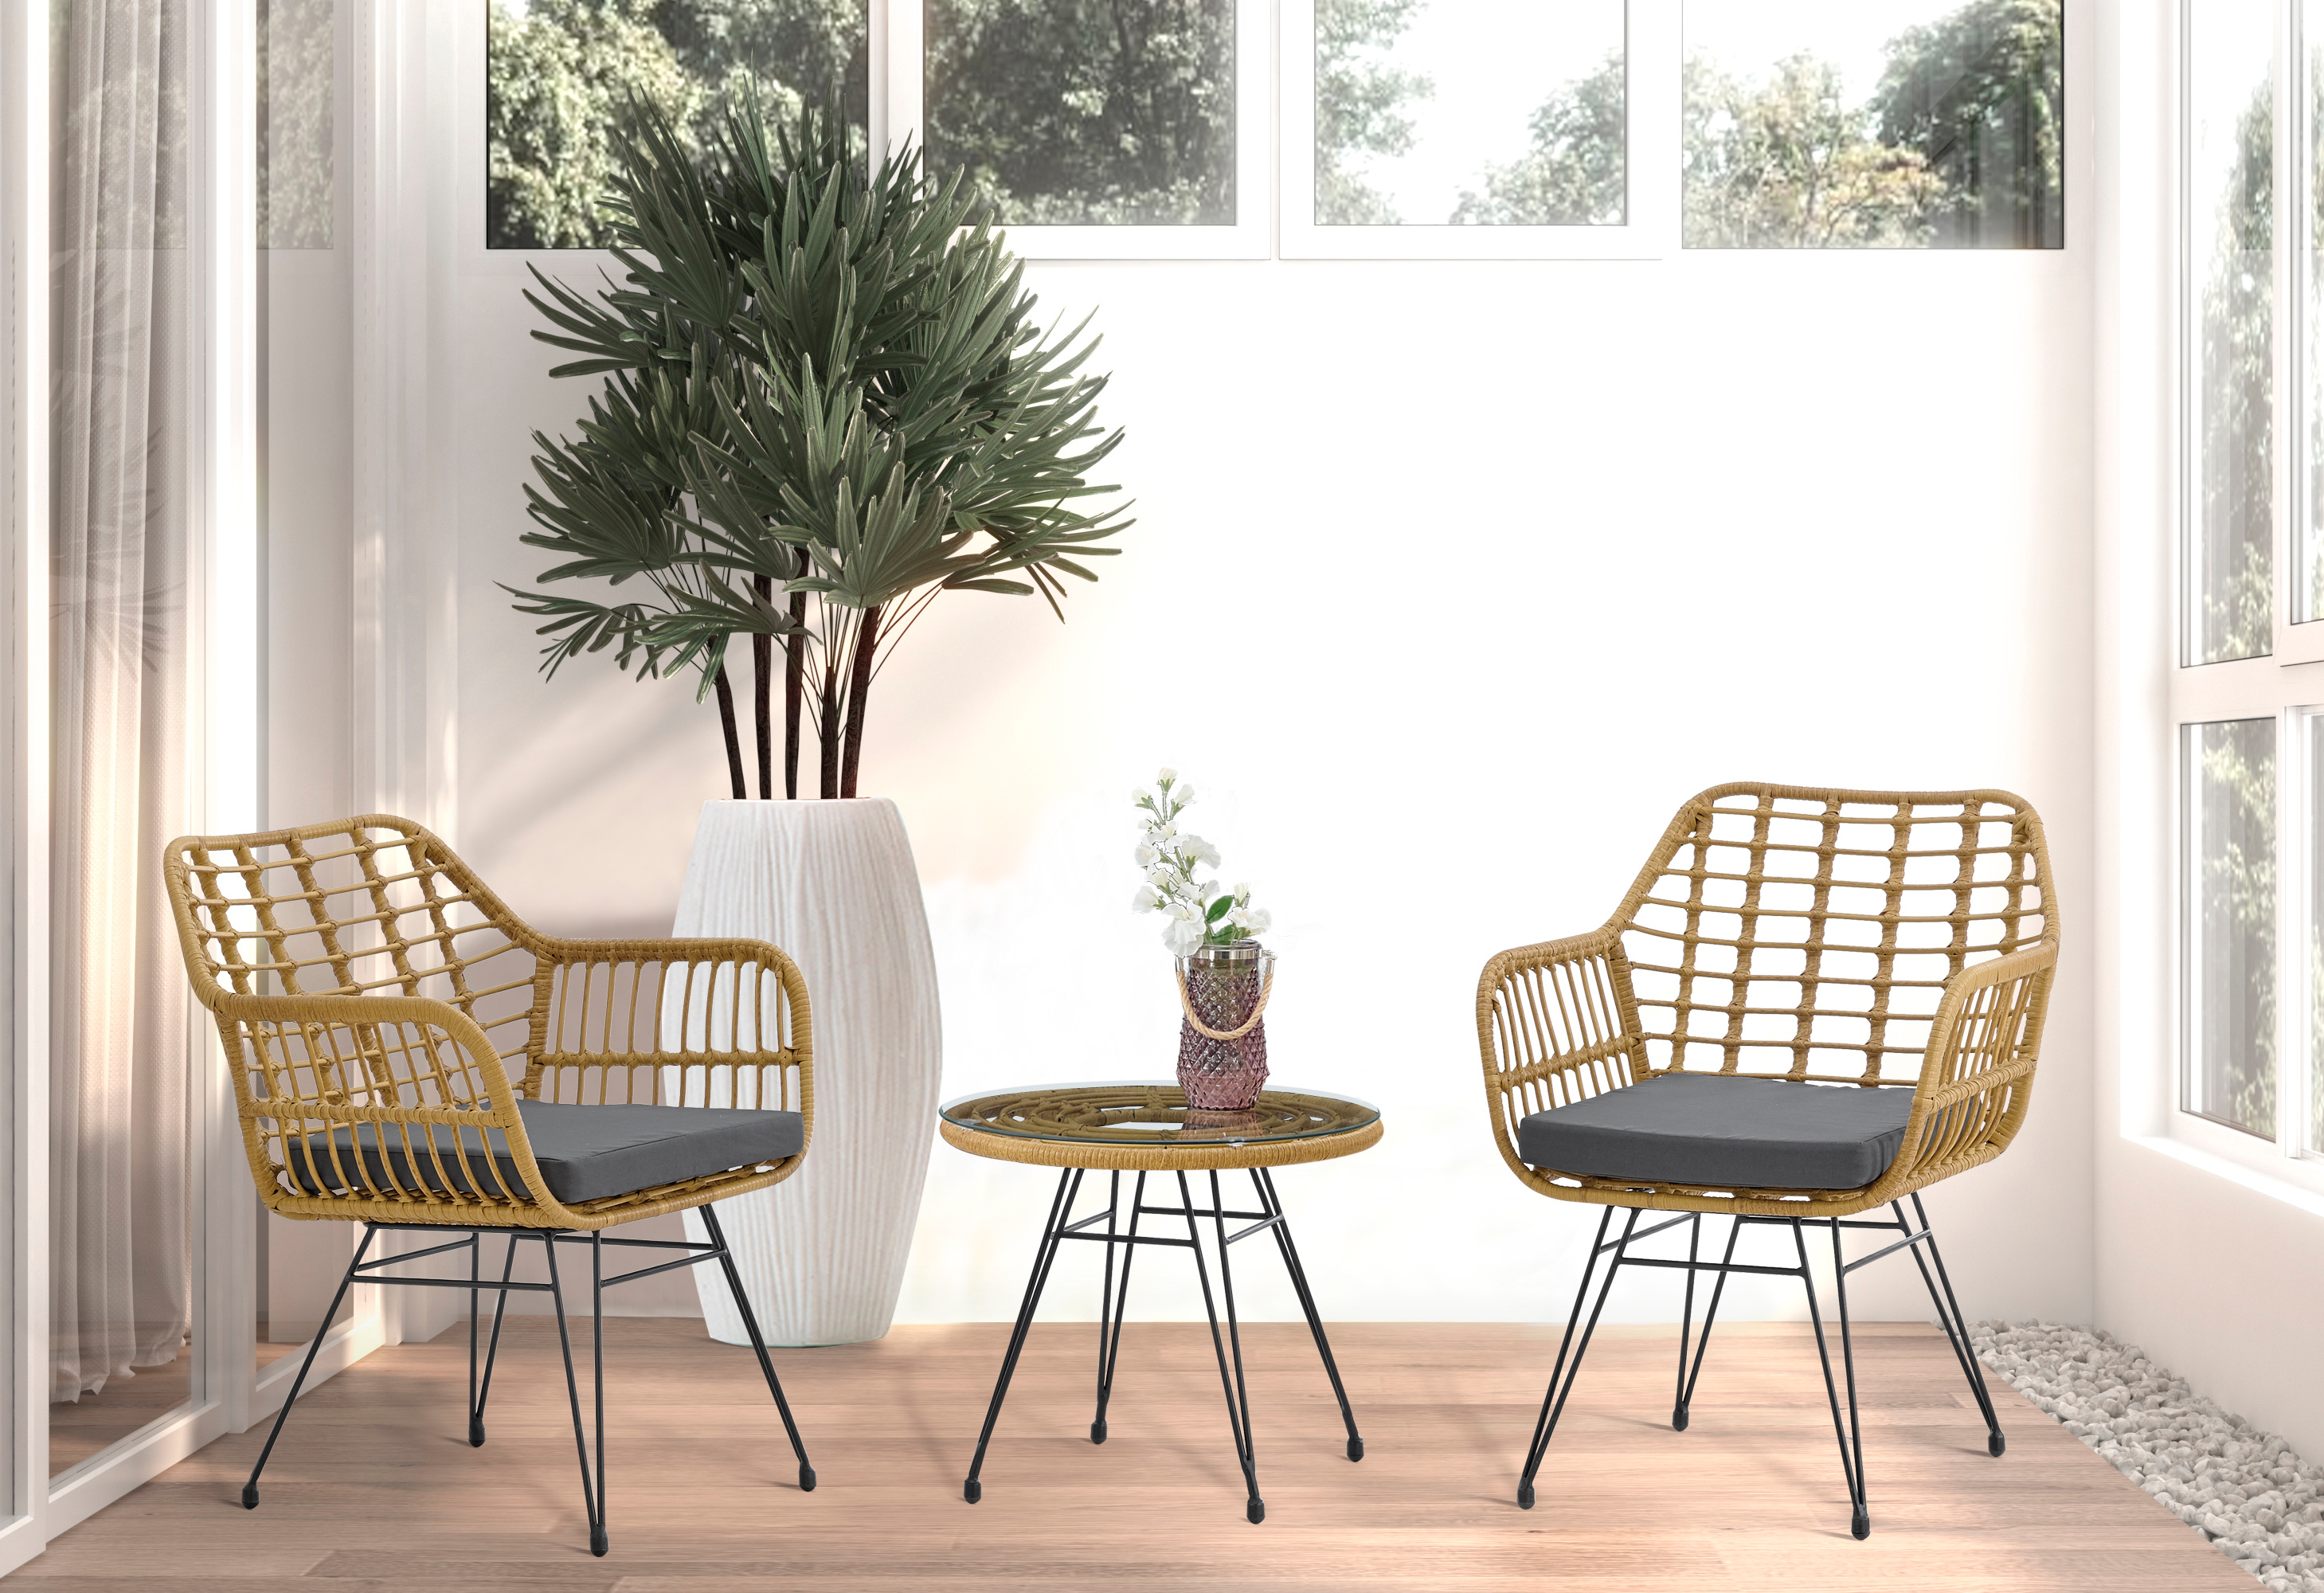 Aukfa 3 Pieces table set,Modern Rattan Coffee Chair Table Set,Outdoor Furniture Rattan Chair,Garden Set with Two Chair and One Table,Conversation Set - image 3 of 9